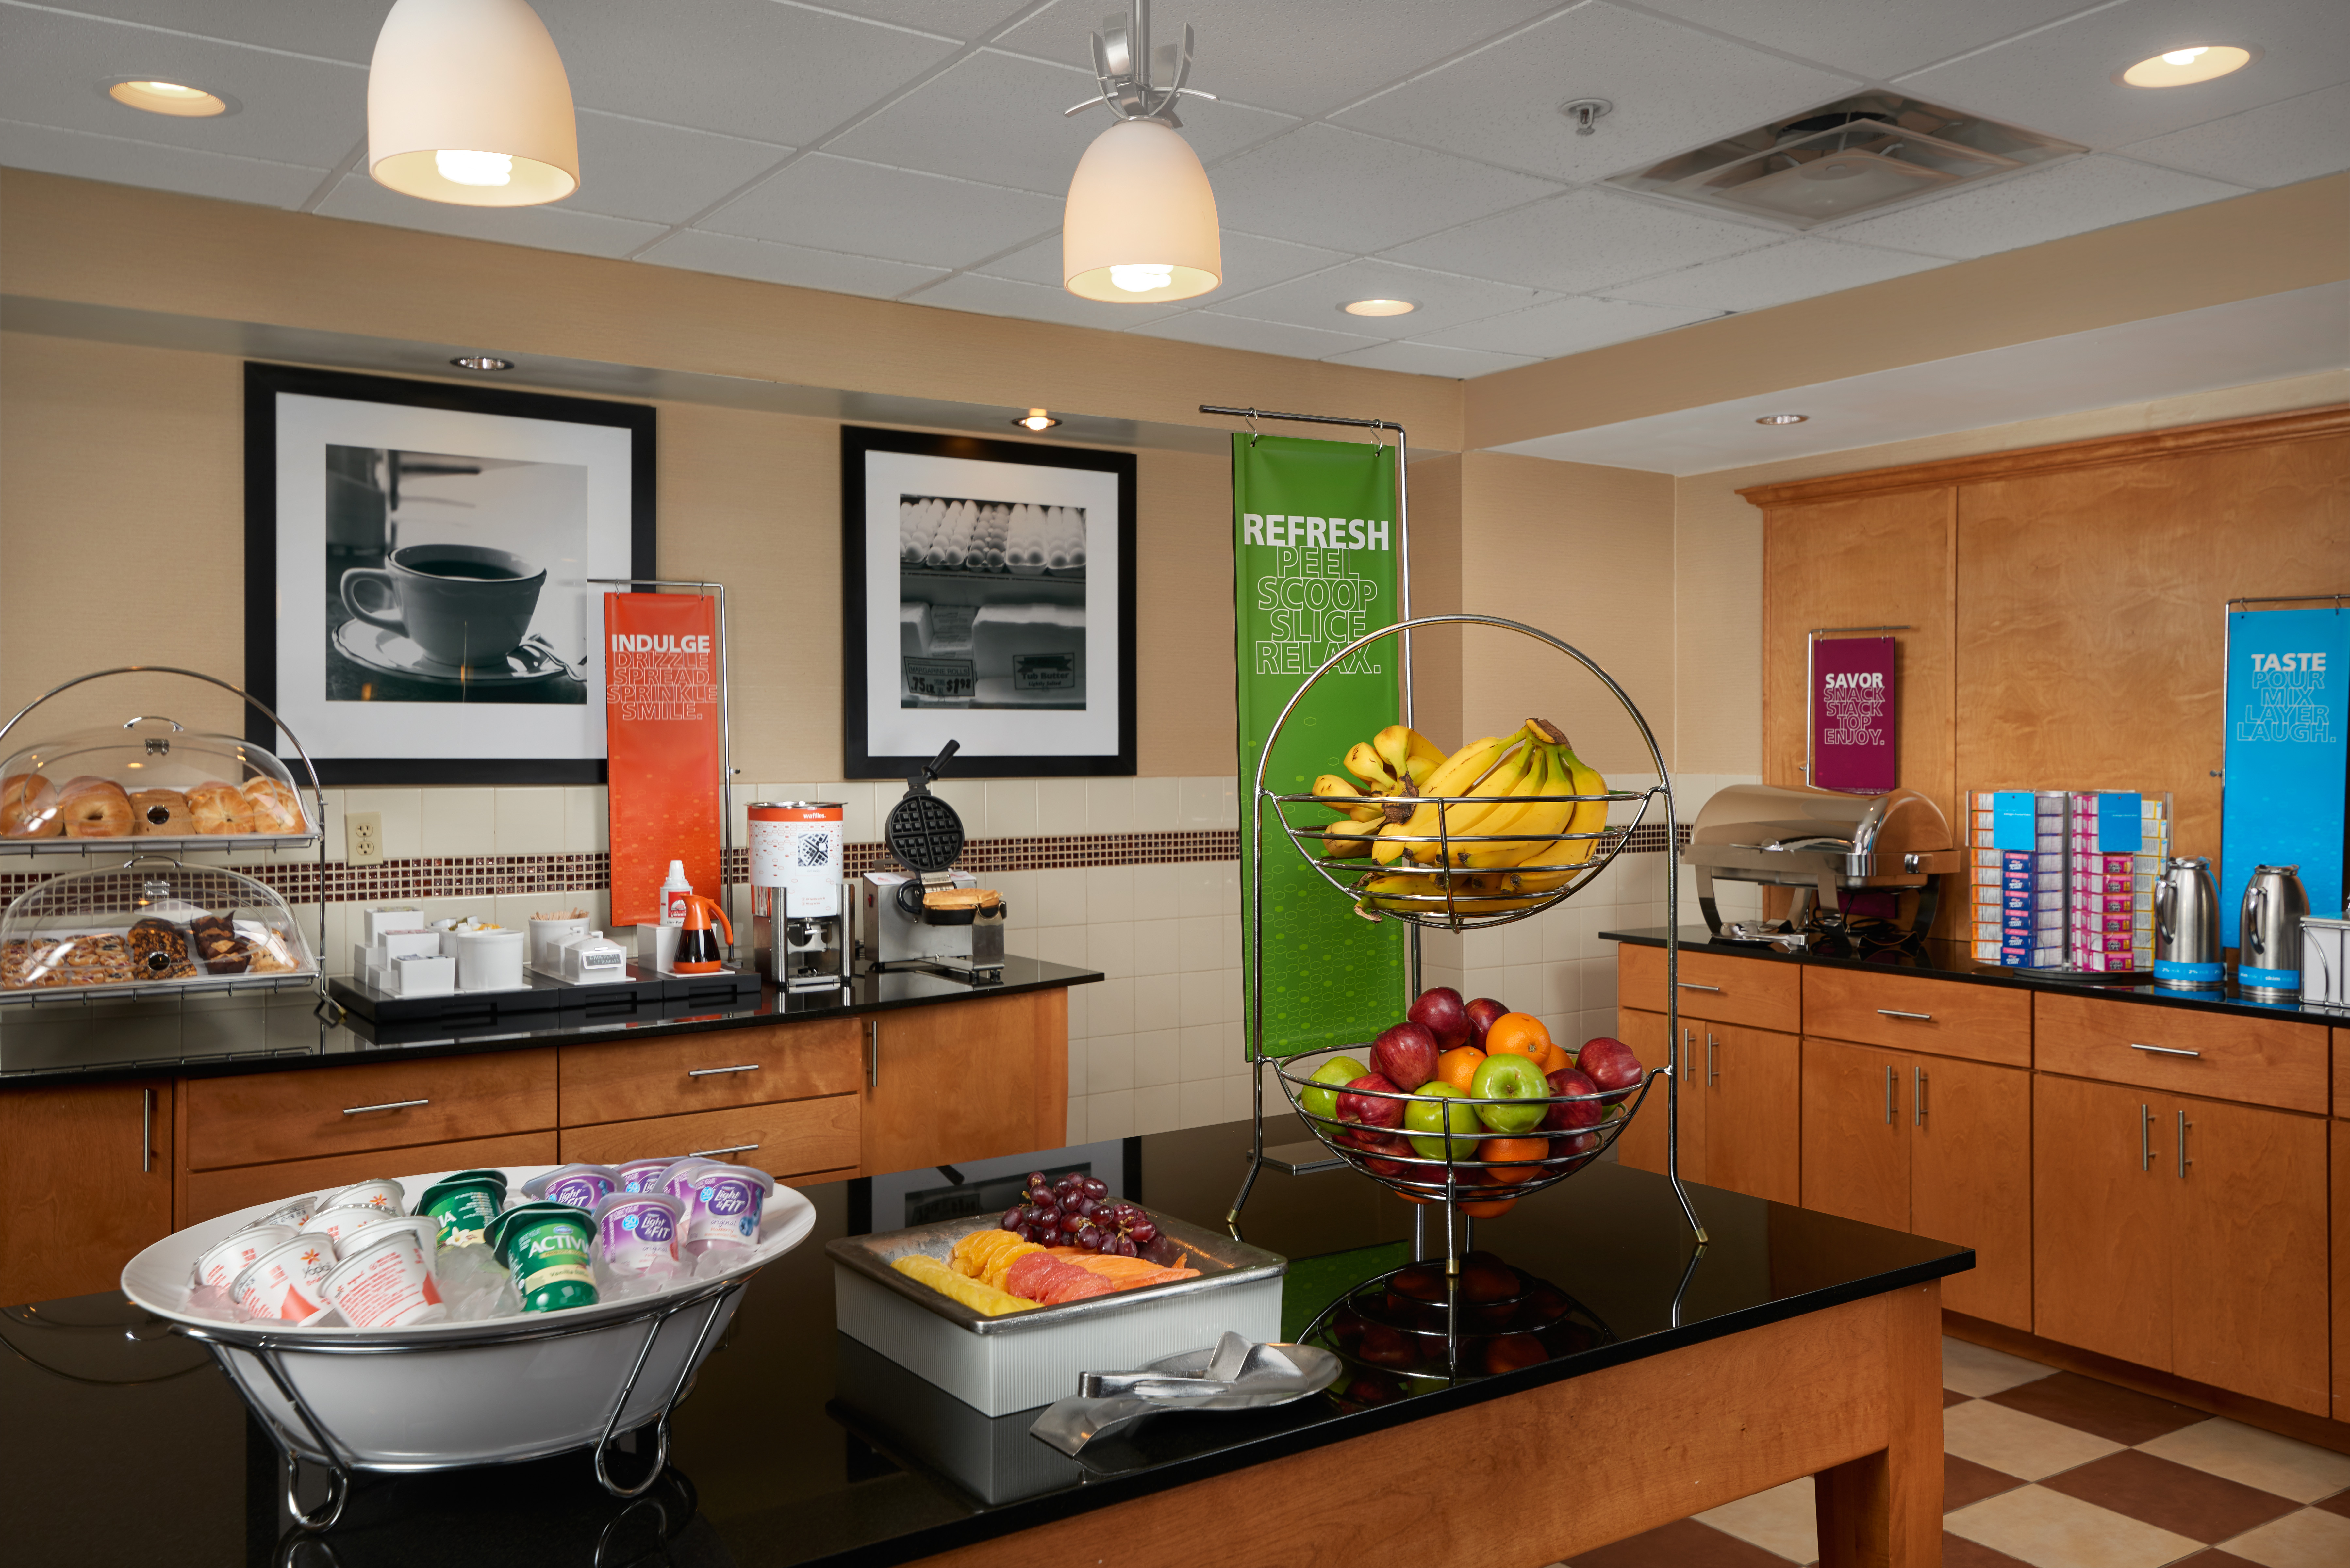 Breakfast Area with Hot Foods and Fresh Fruits